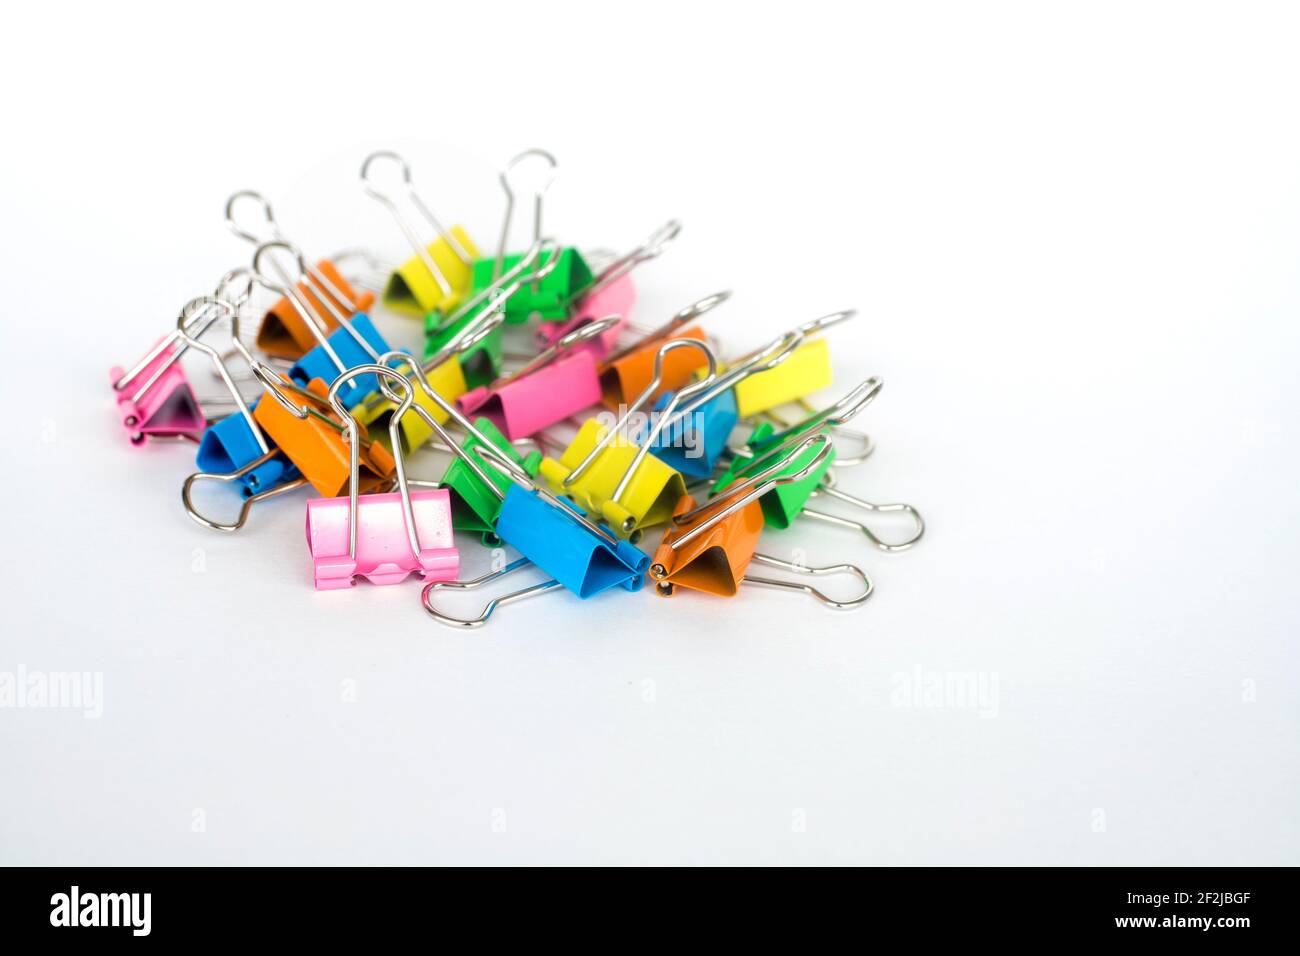 Multi color paper binder clips on white background Stock Photo